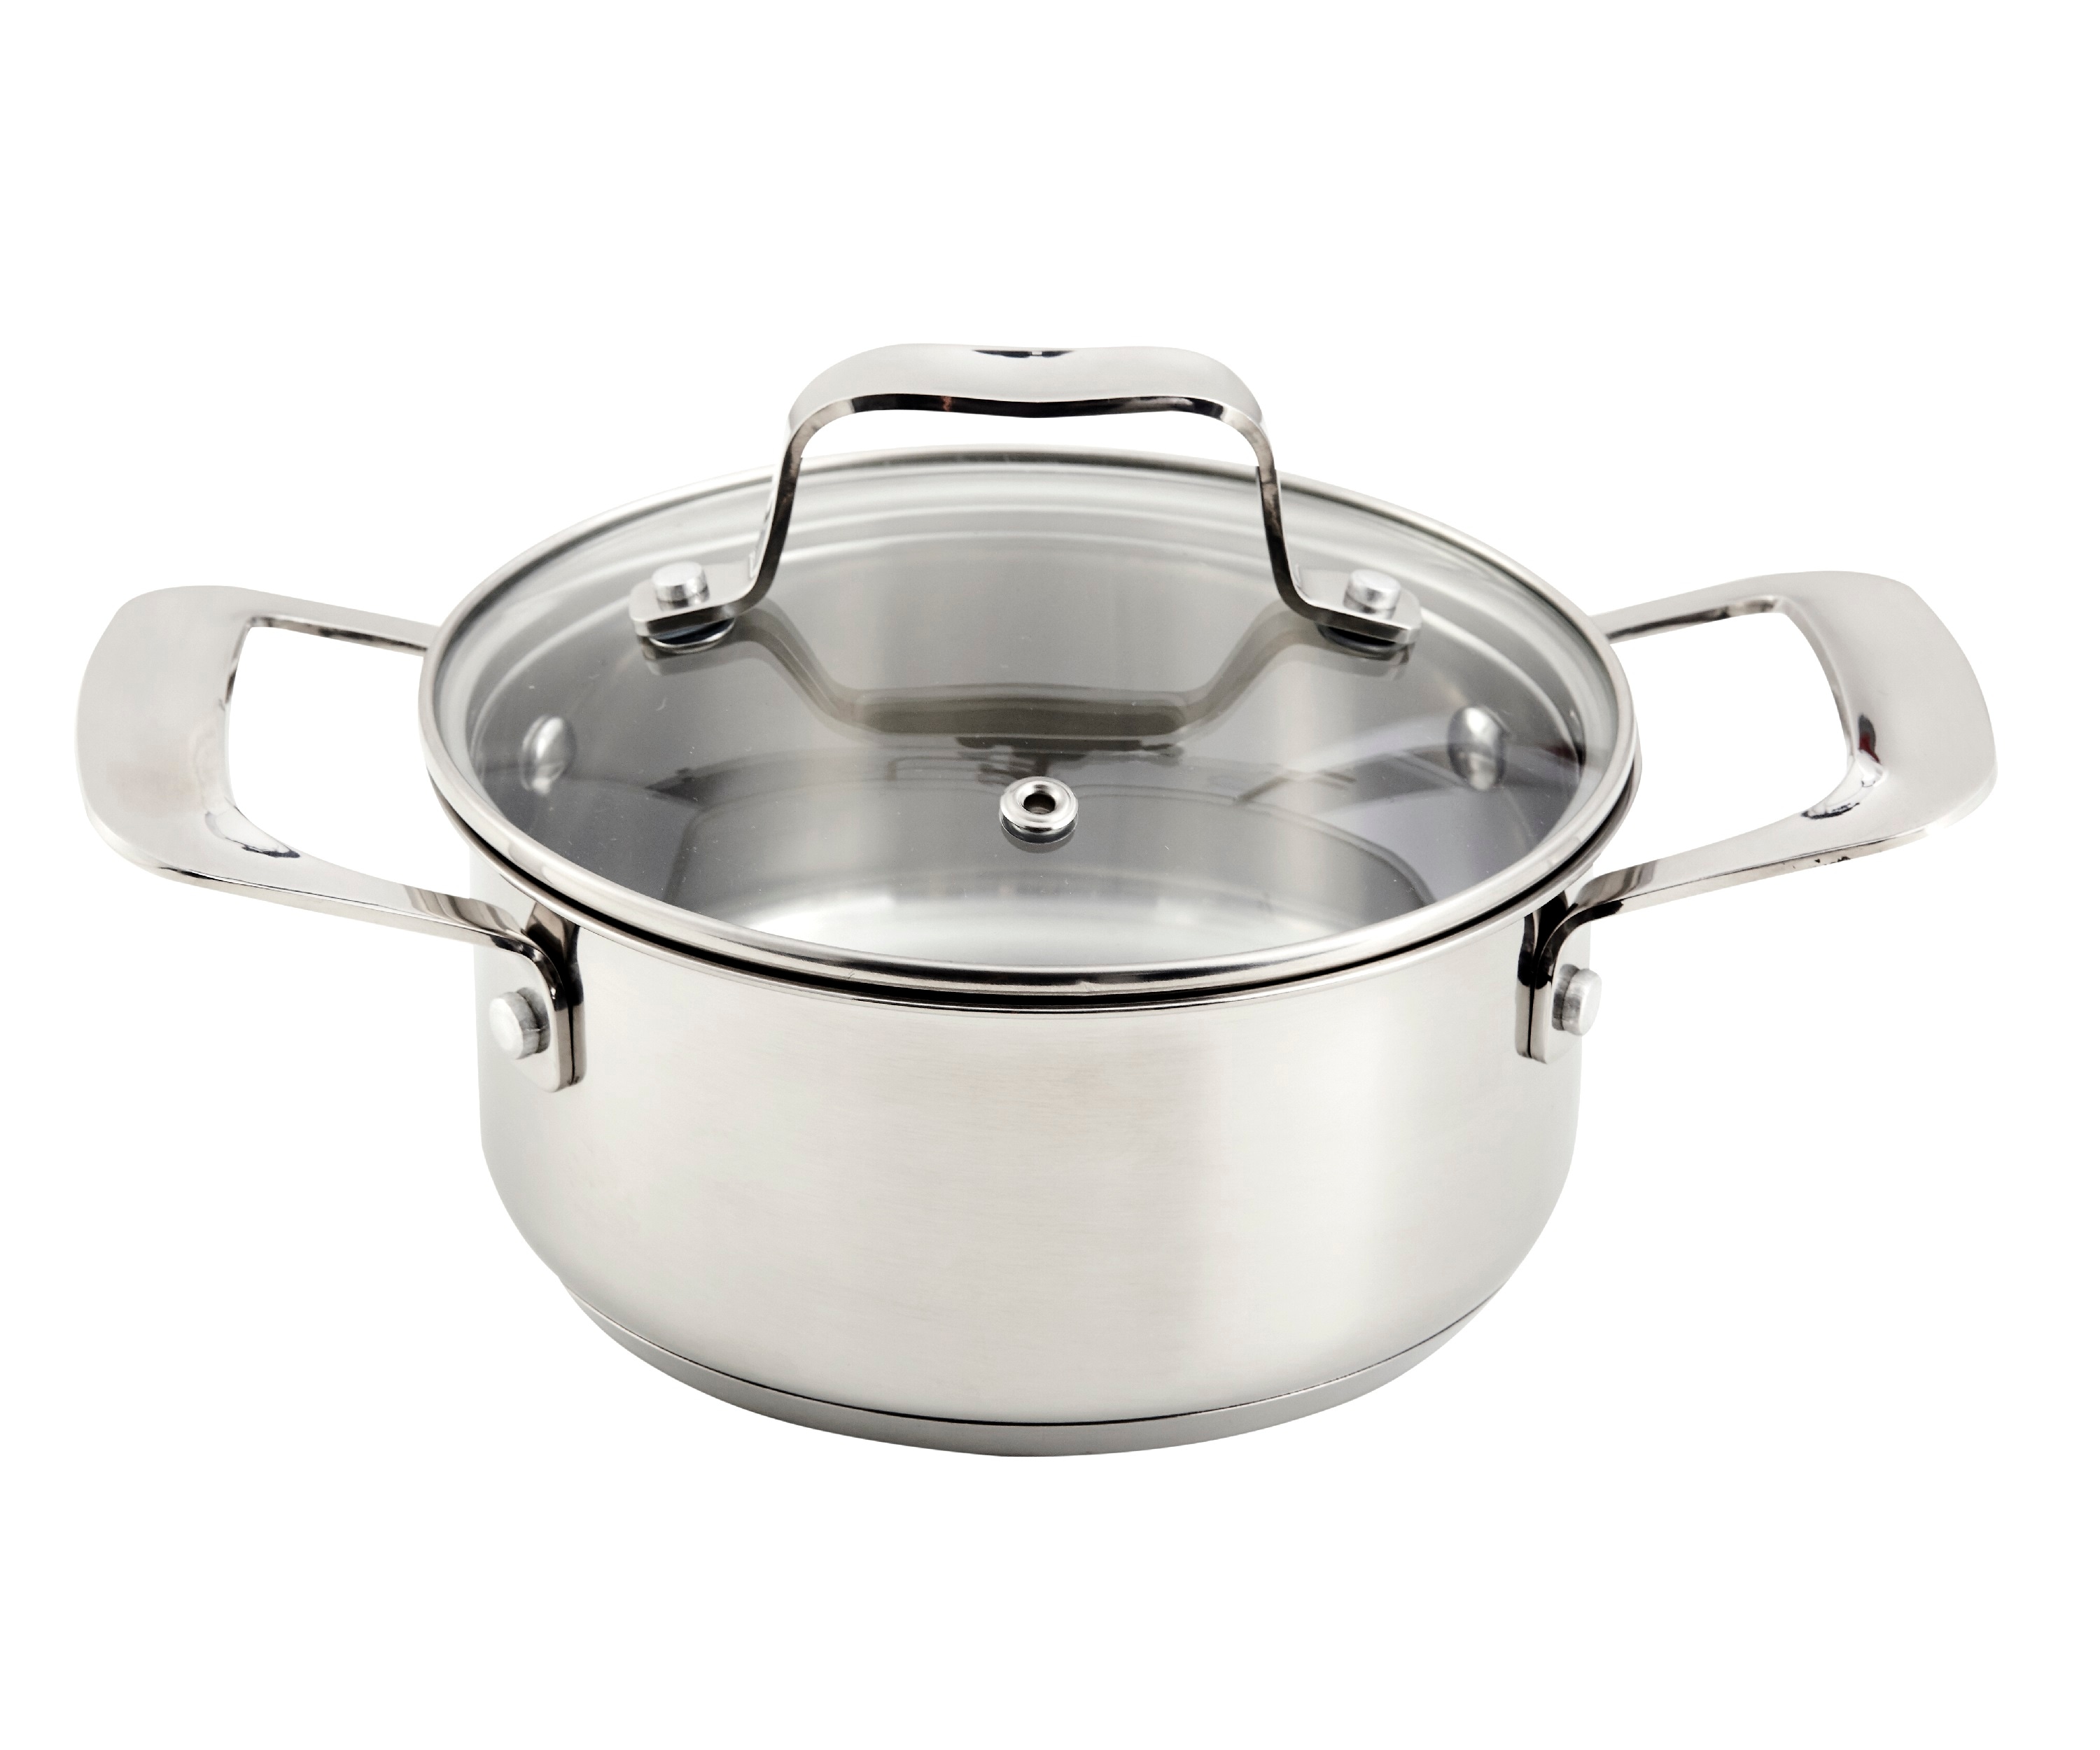 Half Separated Cooking Pot / Stainless Steel Divided Pot / Half & Half STS  Pot